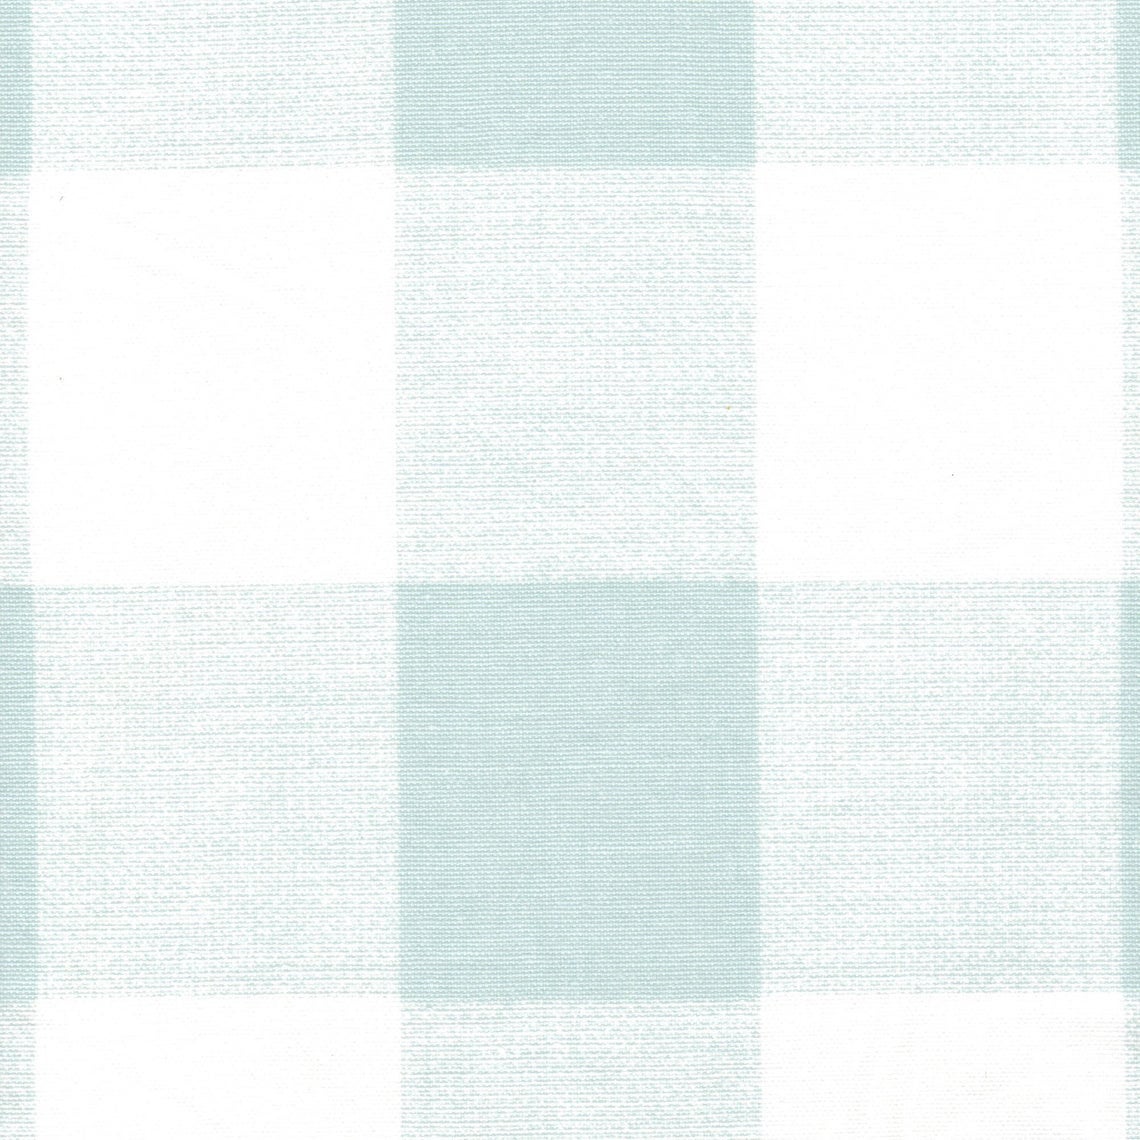 tie-up valance in anderson snowy pale blue-green buffalo check plaid